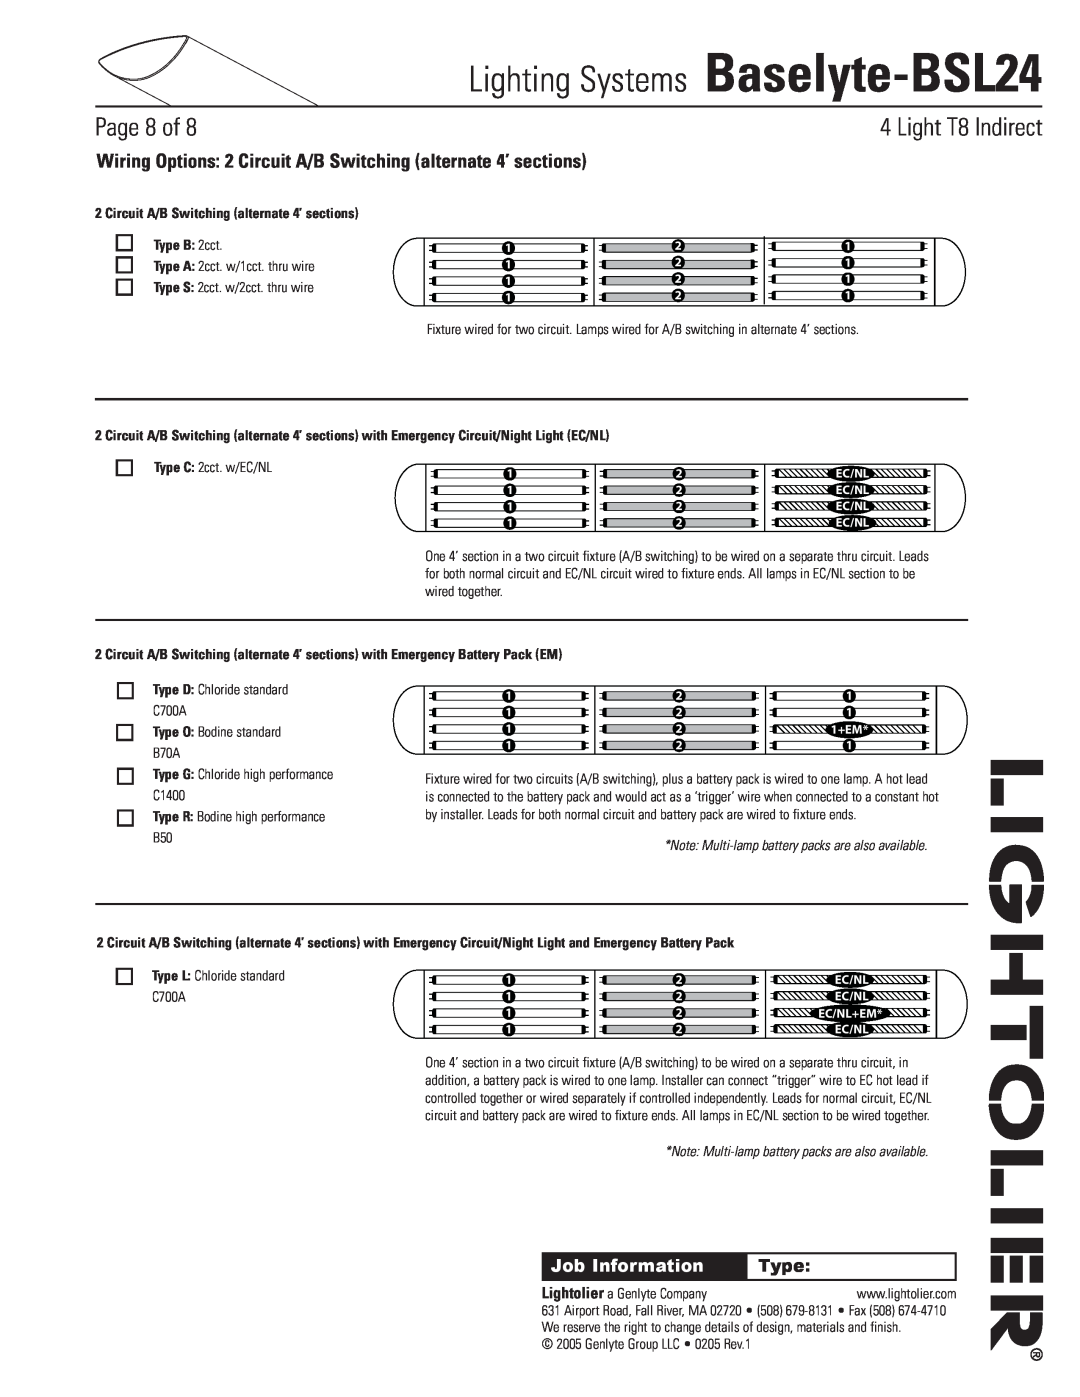 Lightolier Baselyte-BSL24 Circuit A/B Switching alternate 4’ sections, Type B 2cct, Type O Bodine standard B70A, Page of 